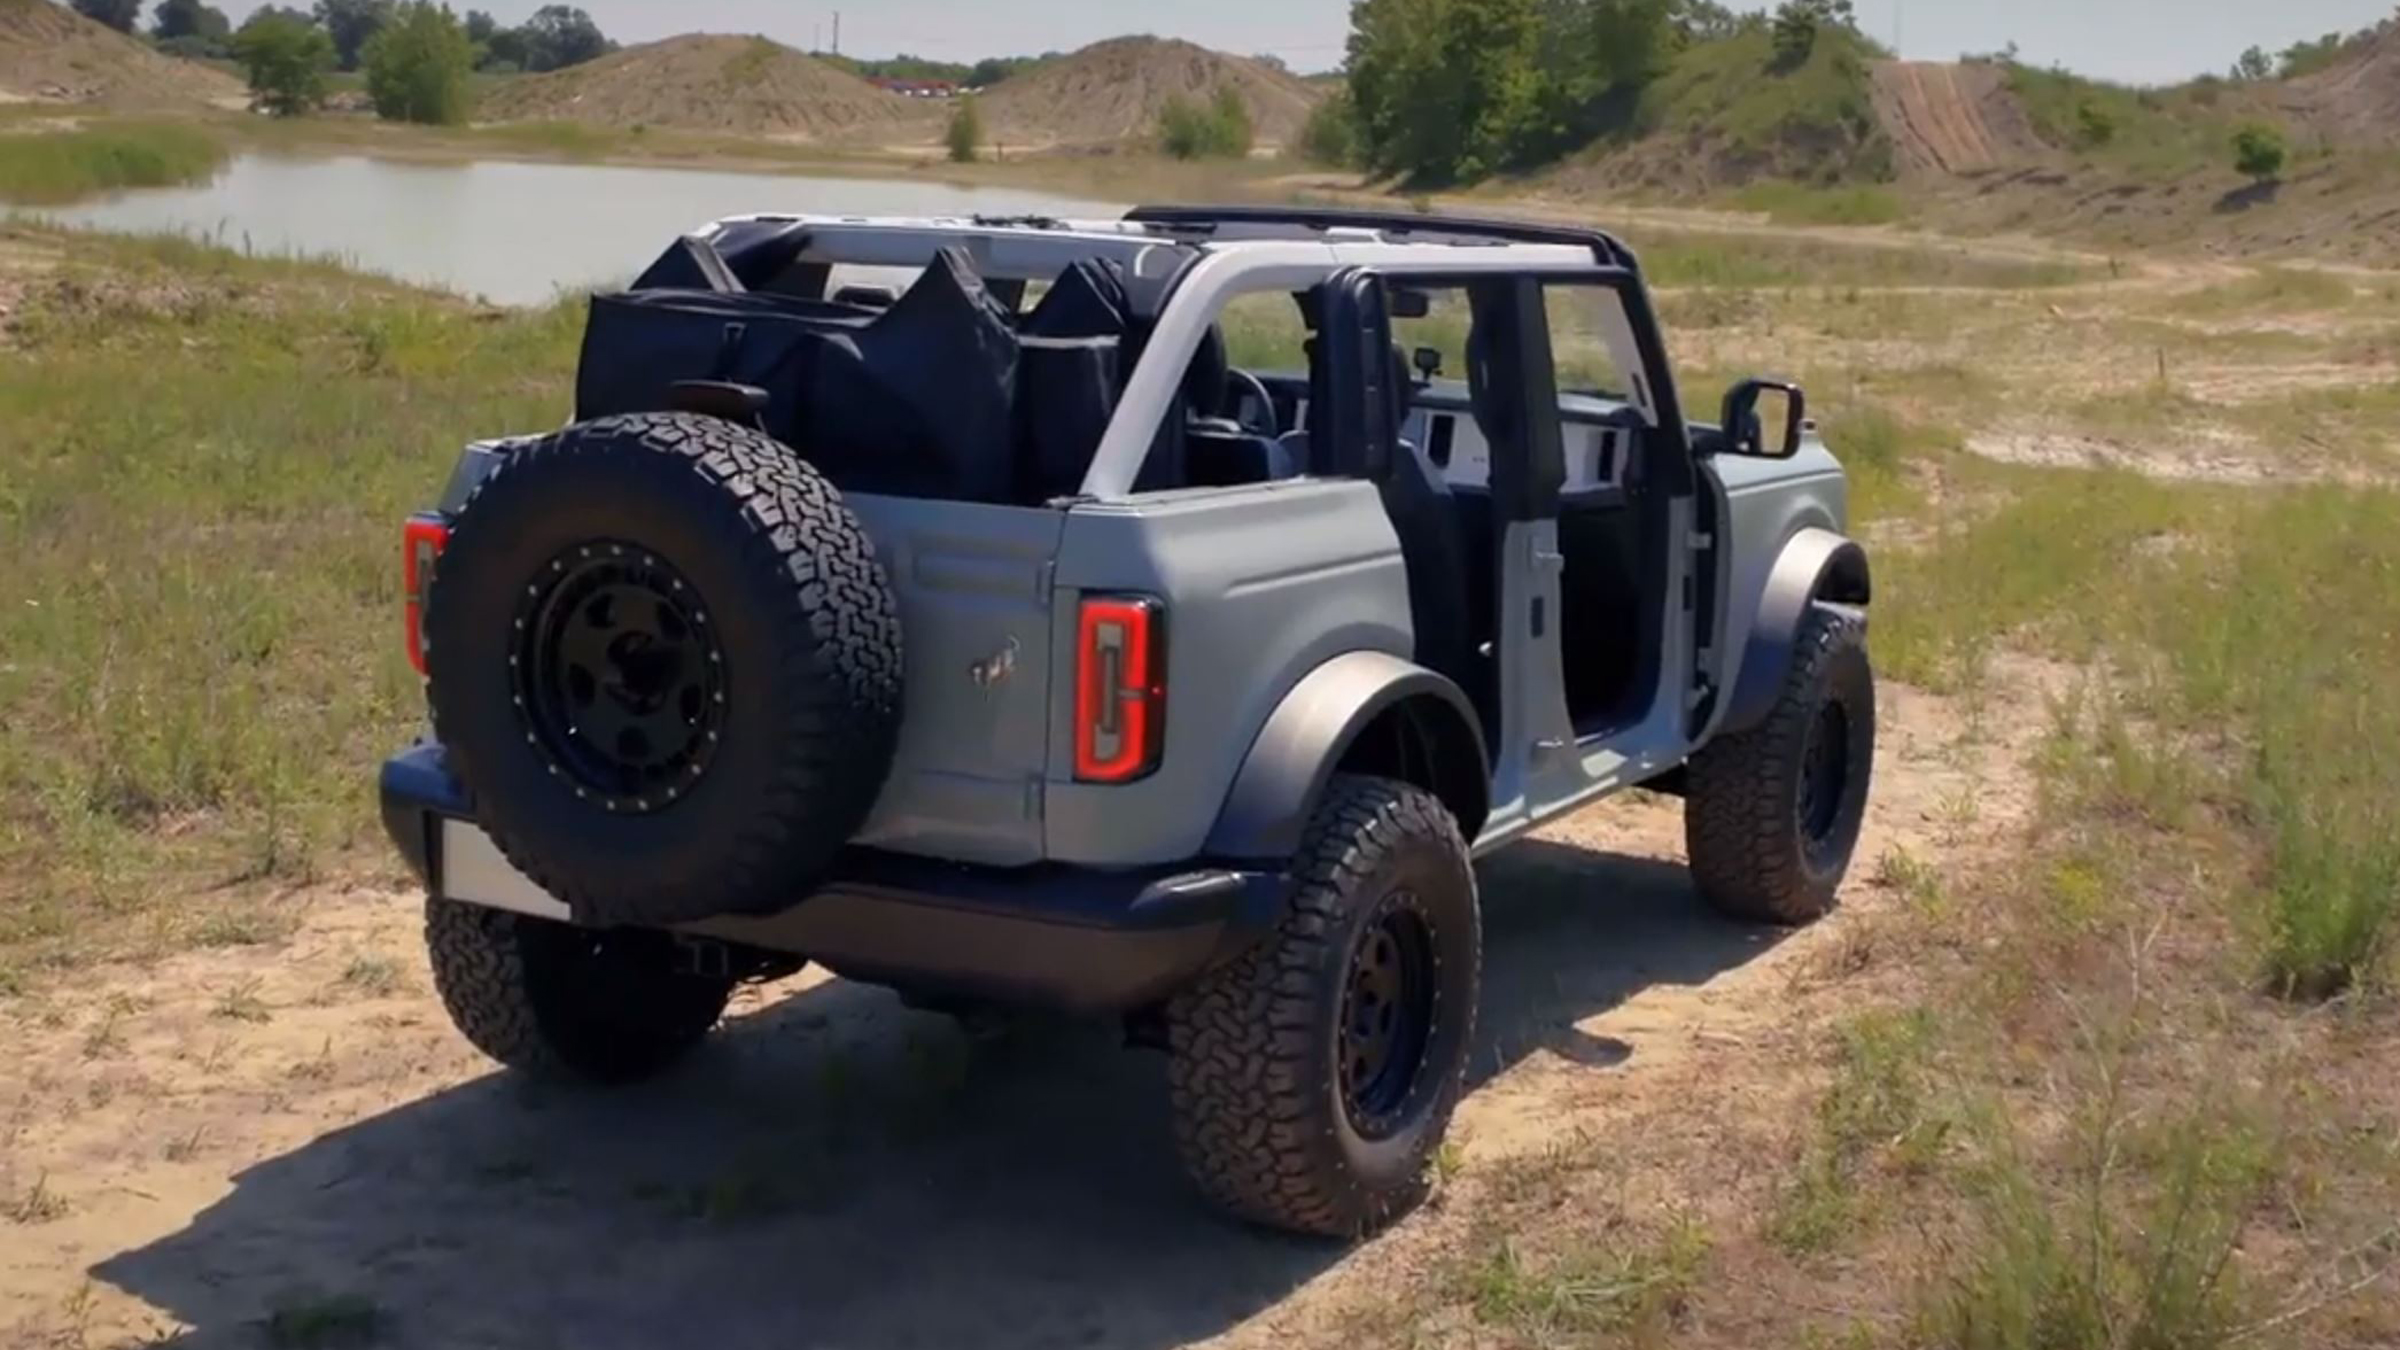 2021 Ford Bronco's modular roof and body easy removal, customization